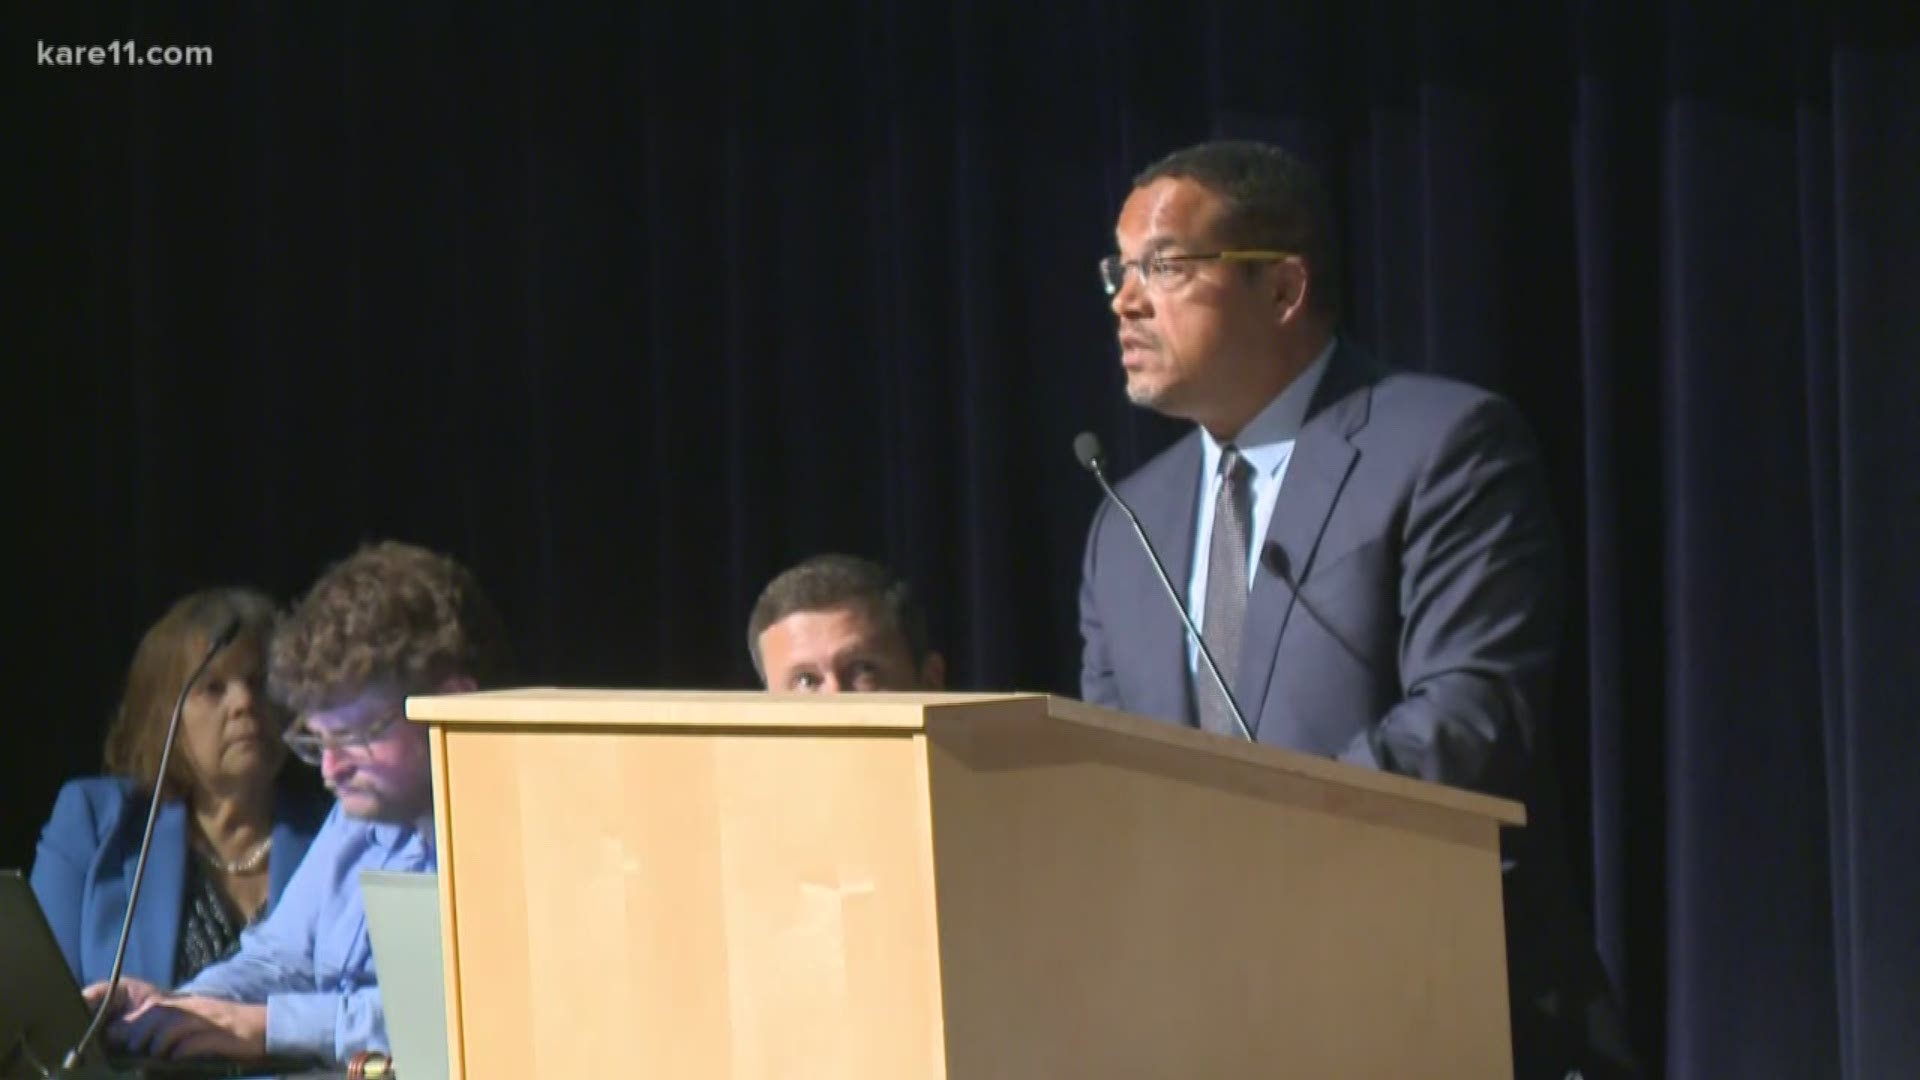 Minnesota Democrats are standing behind Rep. Keith Ellison and his bid for state attorney general, despite an allegation of domestic abuse from an ex-girlfriend. https://kare11.tv/2nPyc3S